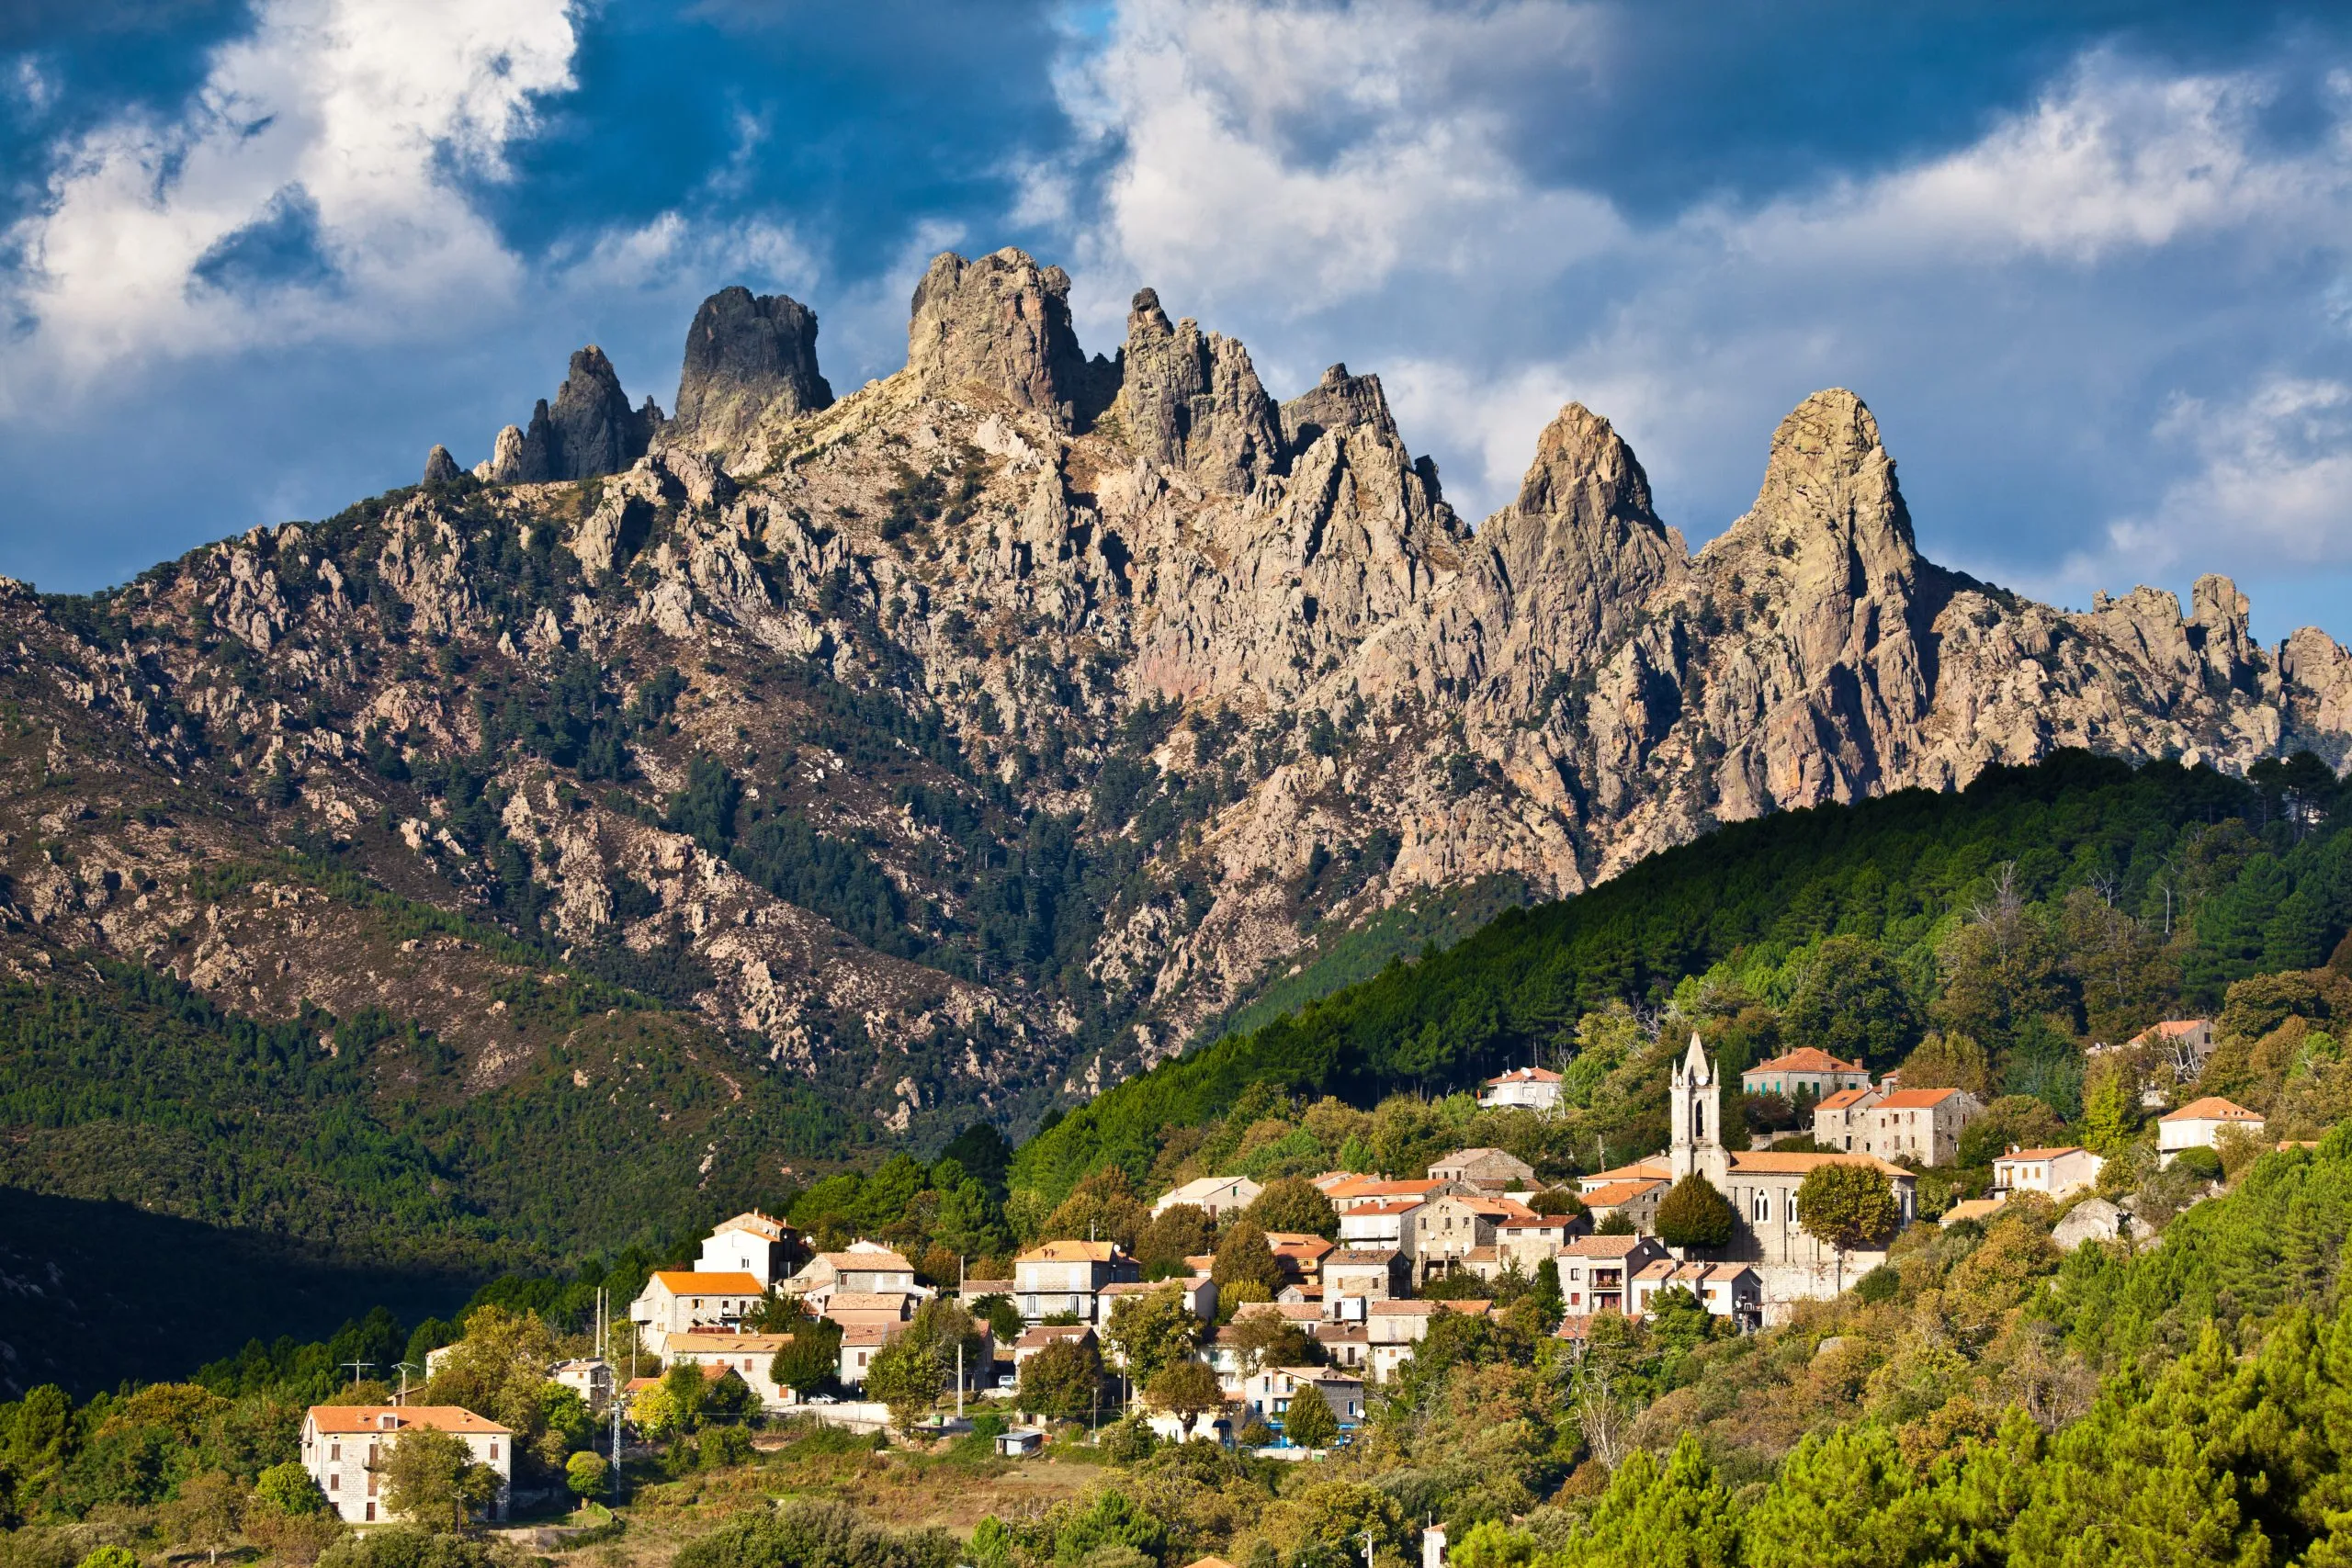 Take in the majestic needles of Bavella